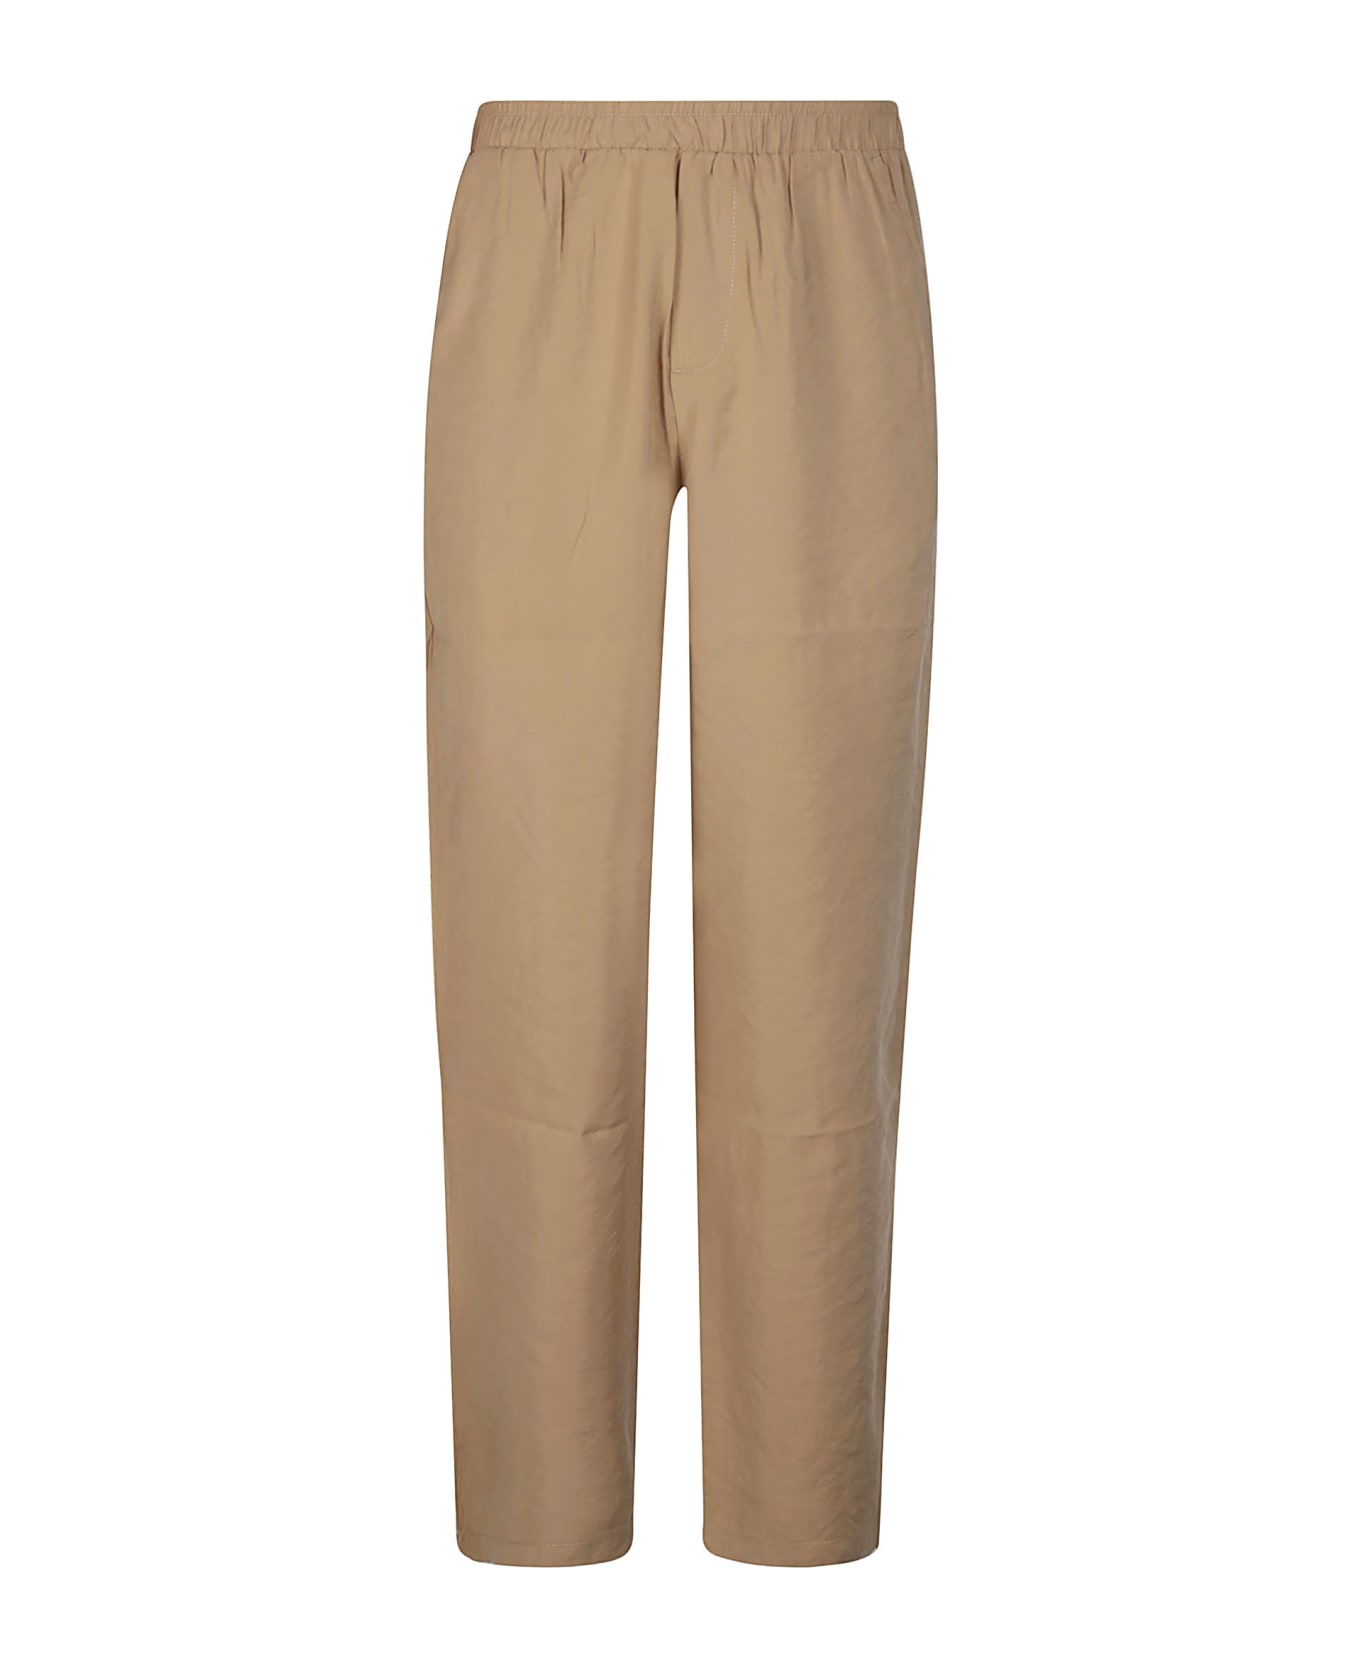 Family First Milano Soft Cupro Pant - Beige ボトムス